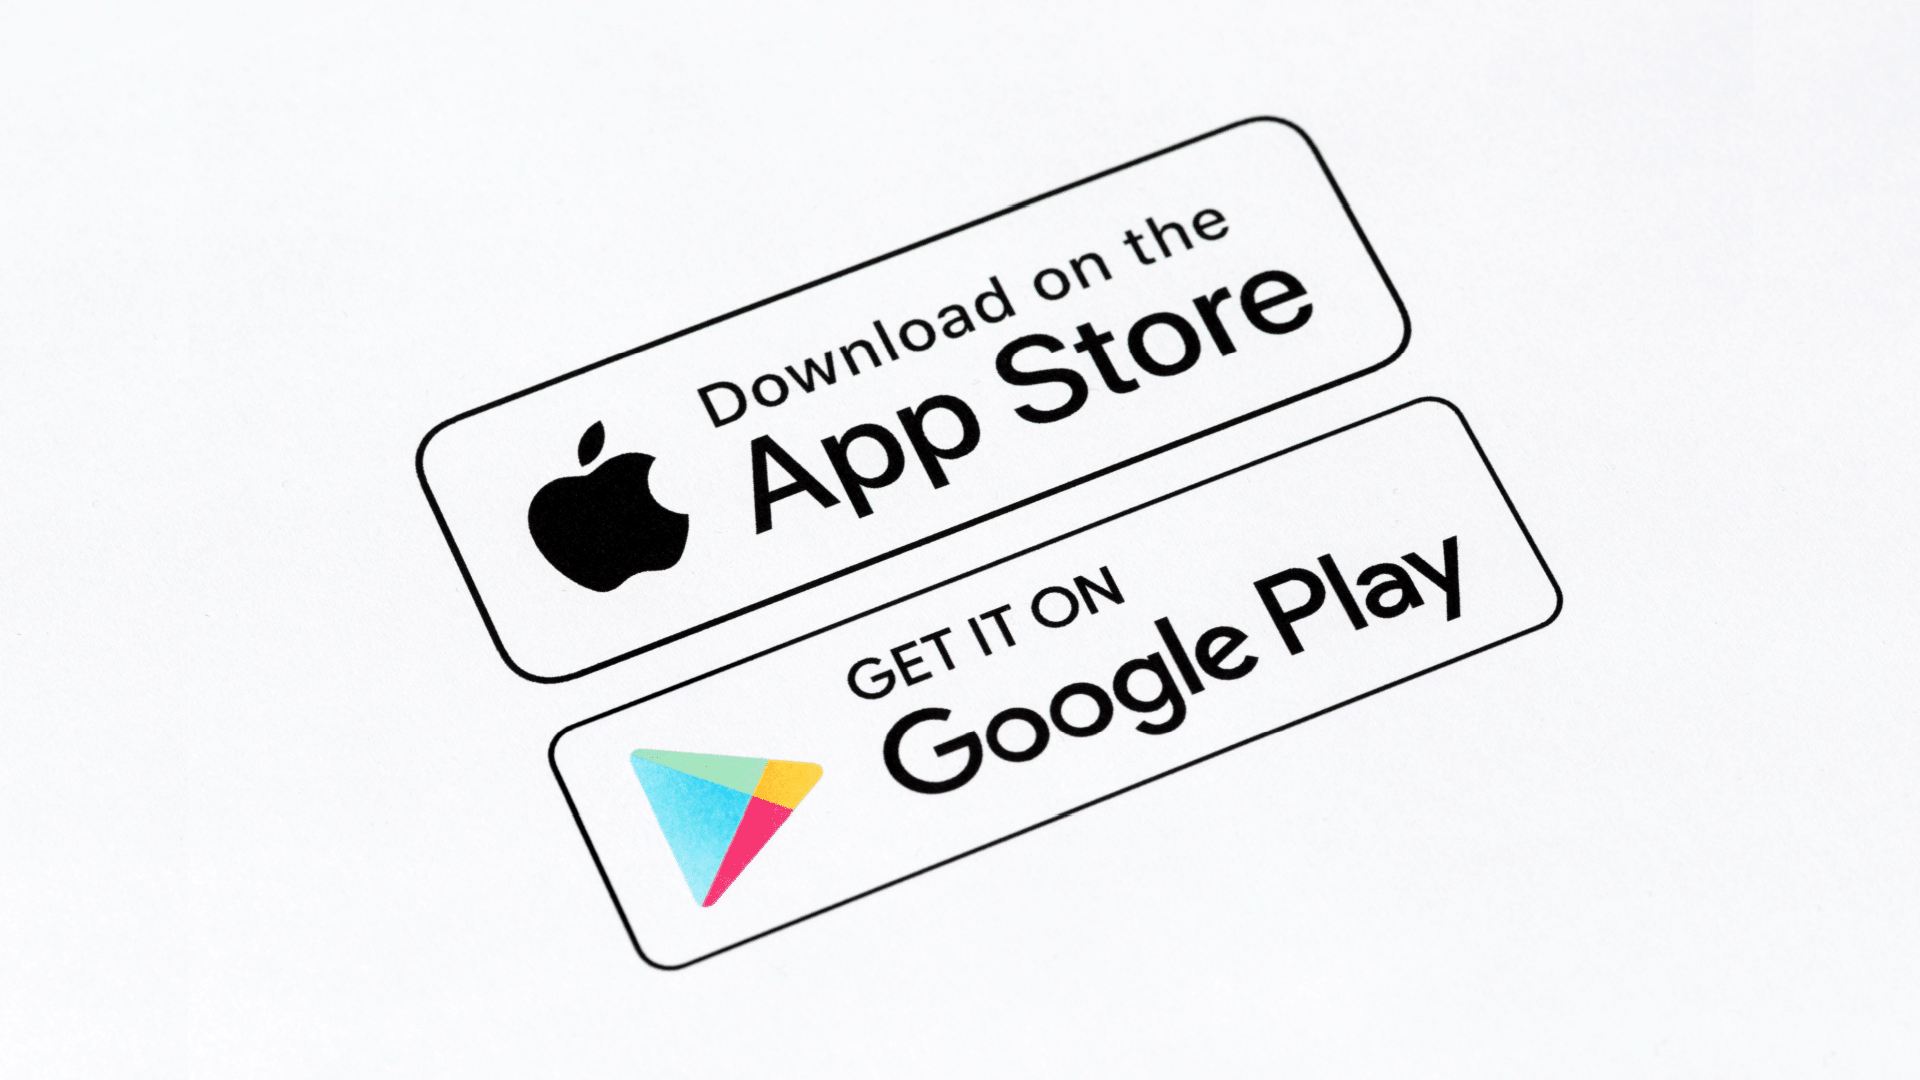 App store optimization: 8 tips to leverage your SEO research skills